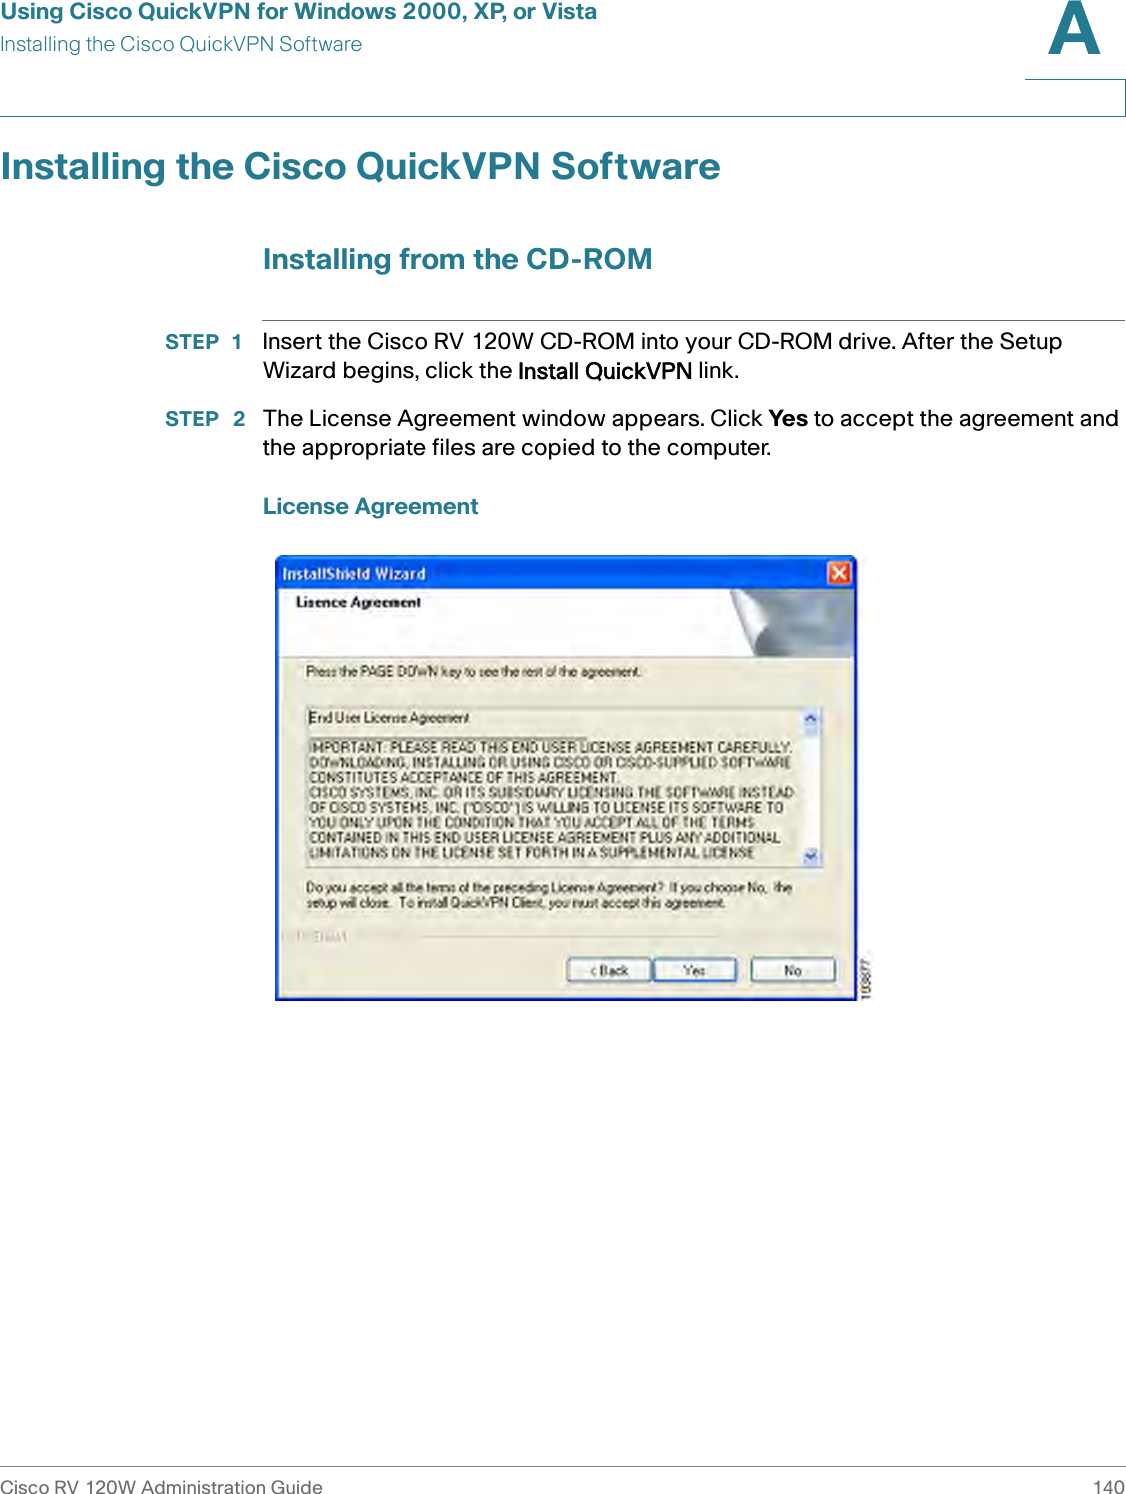 Using Cisco QuickVPN for Windows 2000, XP, or VistaInstalling the Cisco QuickVPN SoftwareCisco RV 120W Administration Guide 140A Installing the Cisco QuickVPN SoftwareInstalling from the CD-ROMSTEP 1 Insert the Cisco RV 120W CD-ROM into your CD-ROM drive. After the Setup Wizard begins, click the Install QuickVPN link.STEP  2 The License Agreement window appears. Click Yes to accept the agreement and the appropriate files are copied to the computer.License Agreement